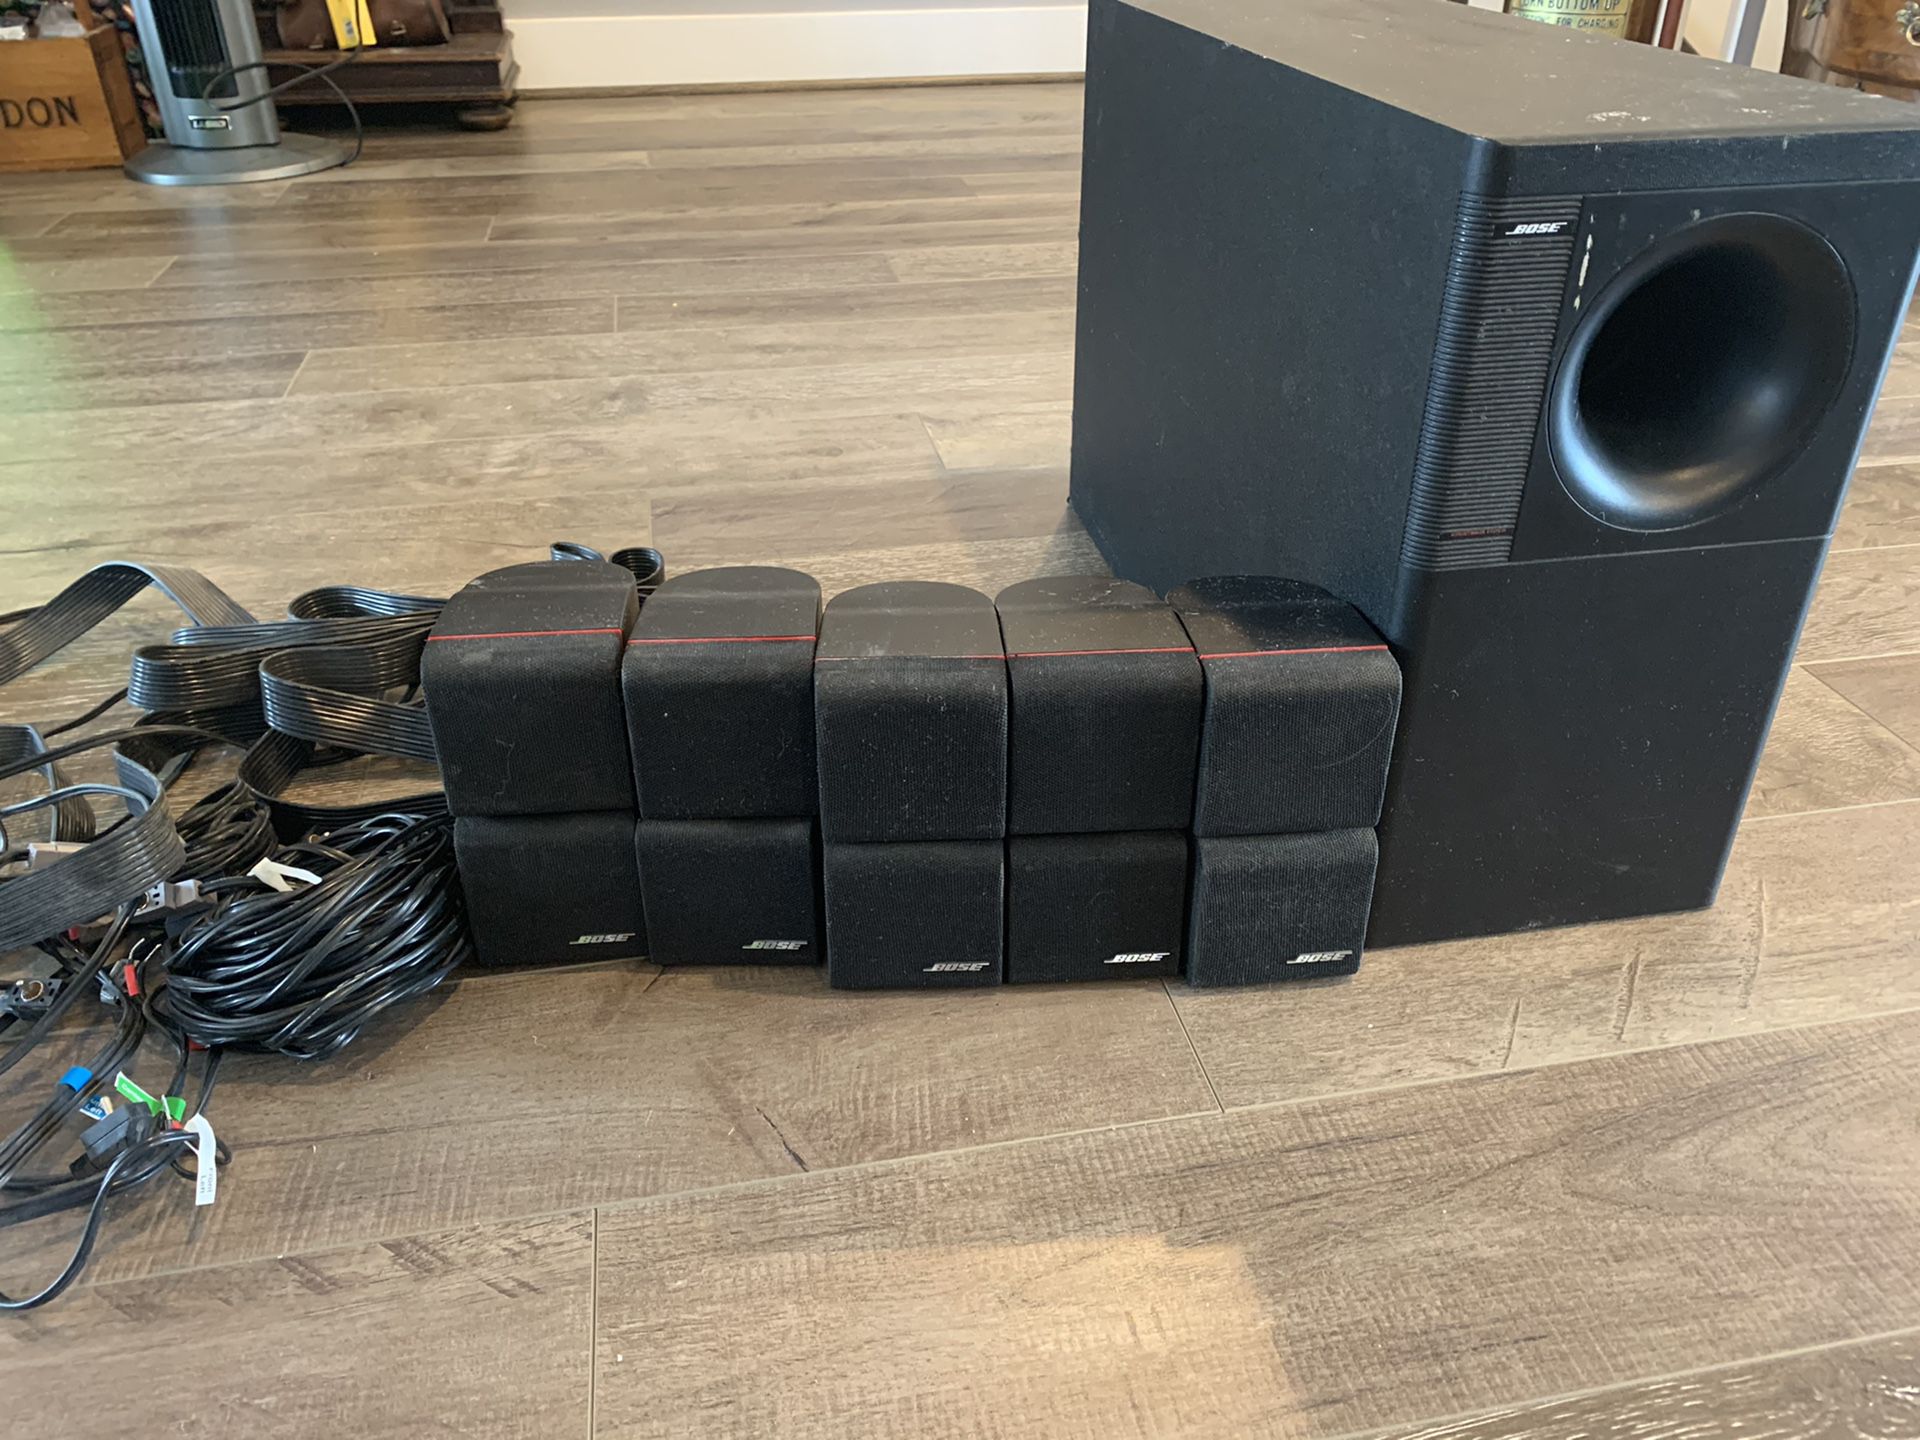 Bose Acoustimass 10 series home theater speaker system